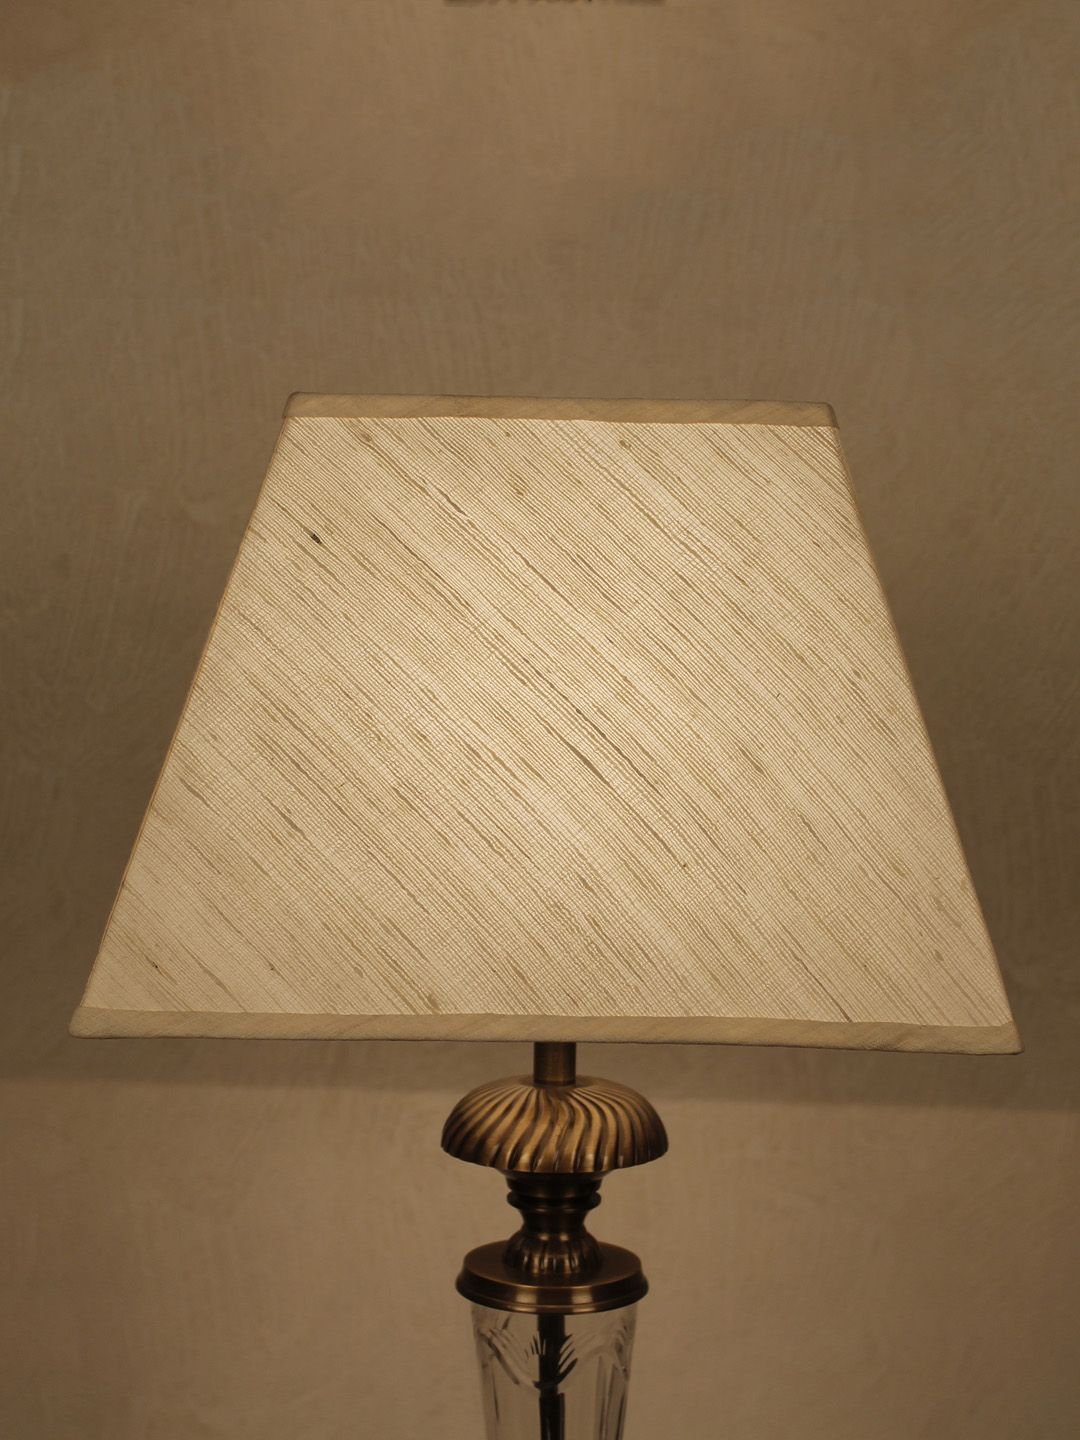 THE LIGHT STORE Off-White Table Top Lamp Shade Price in India